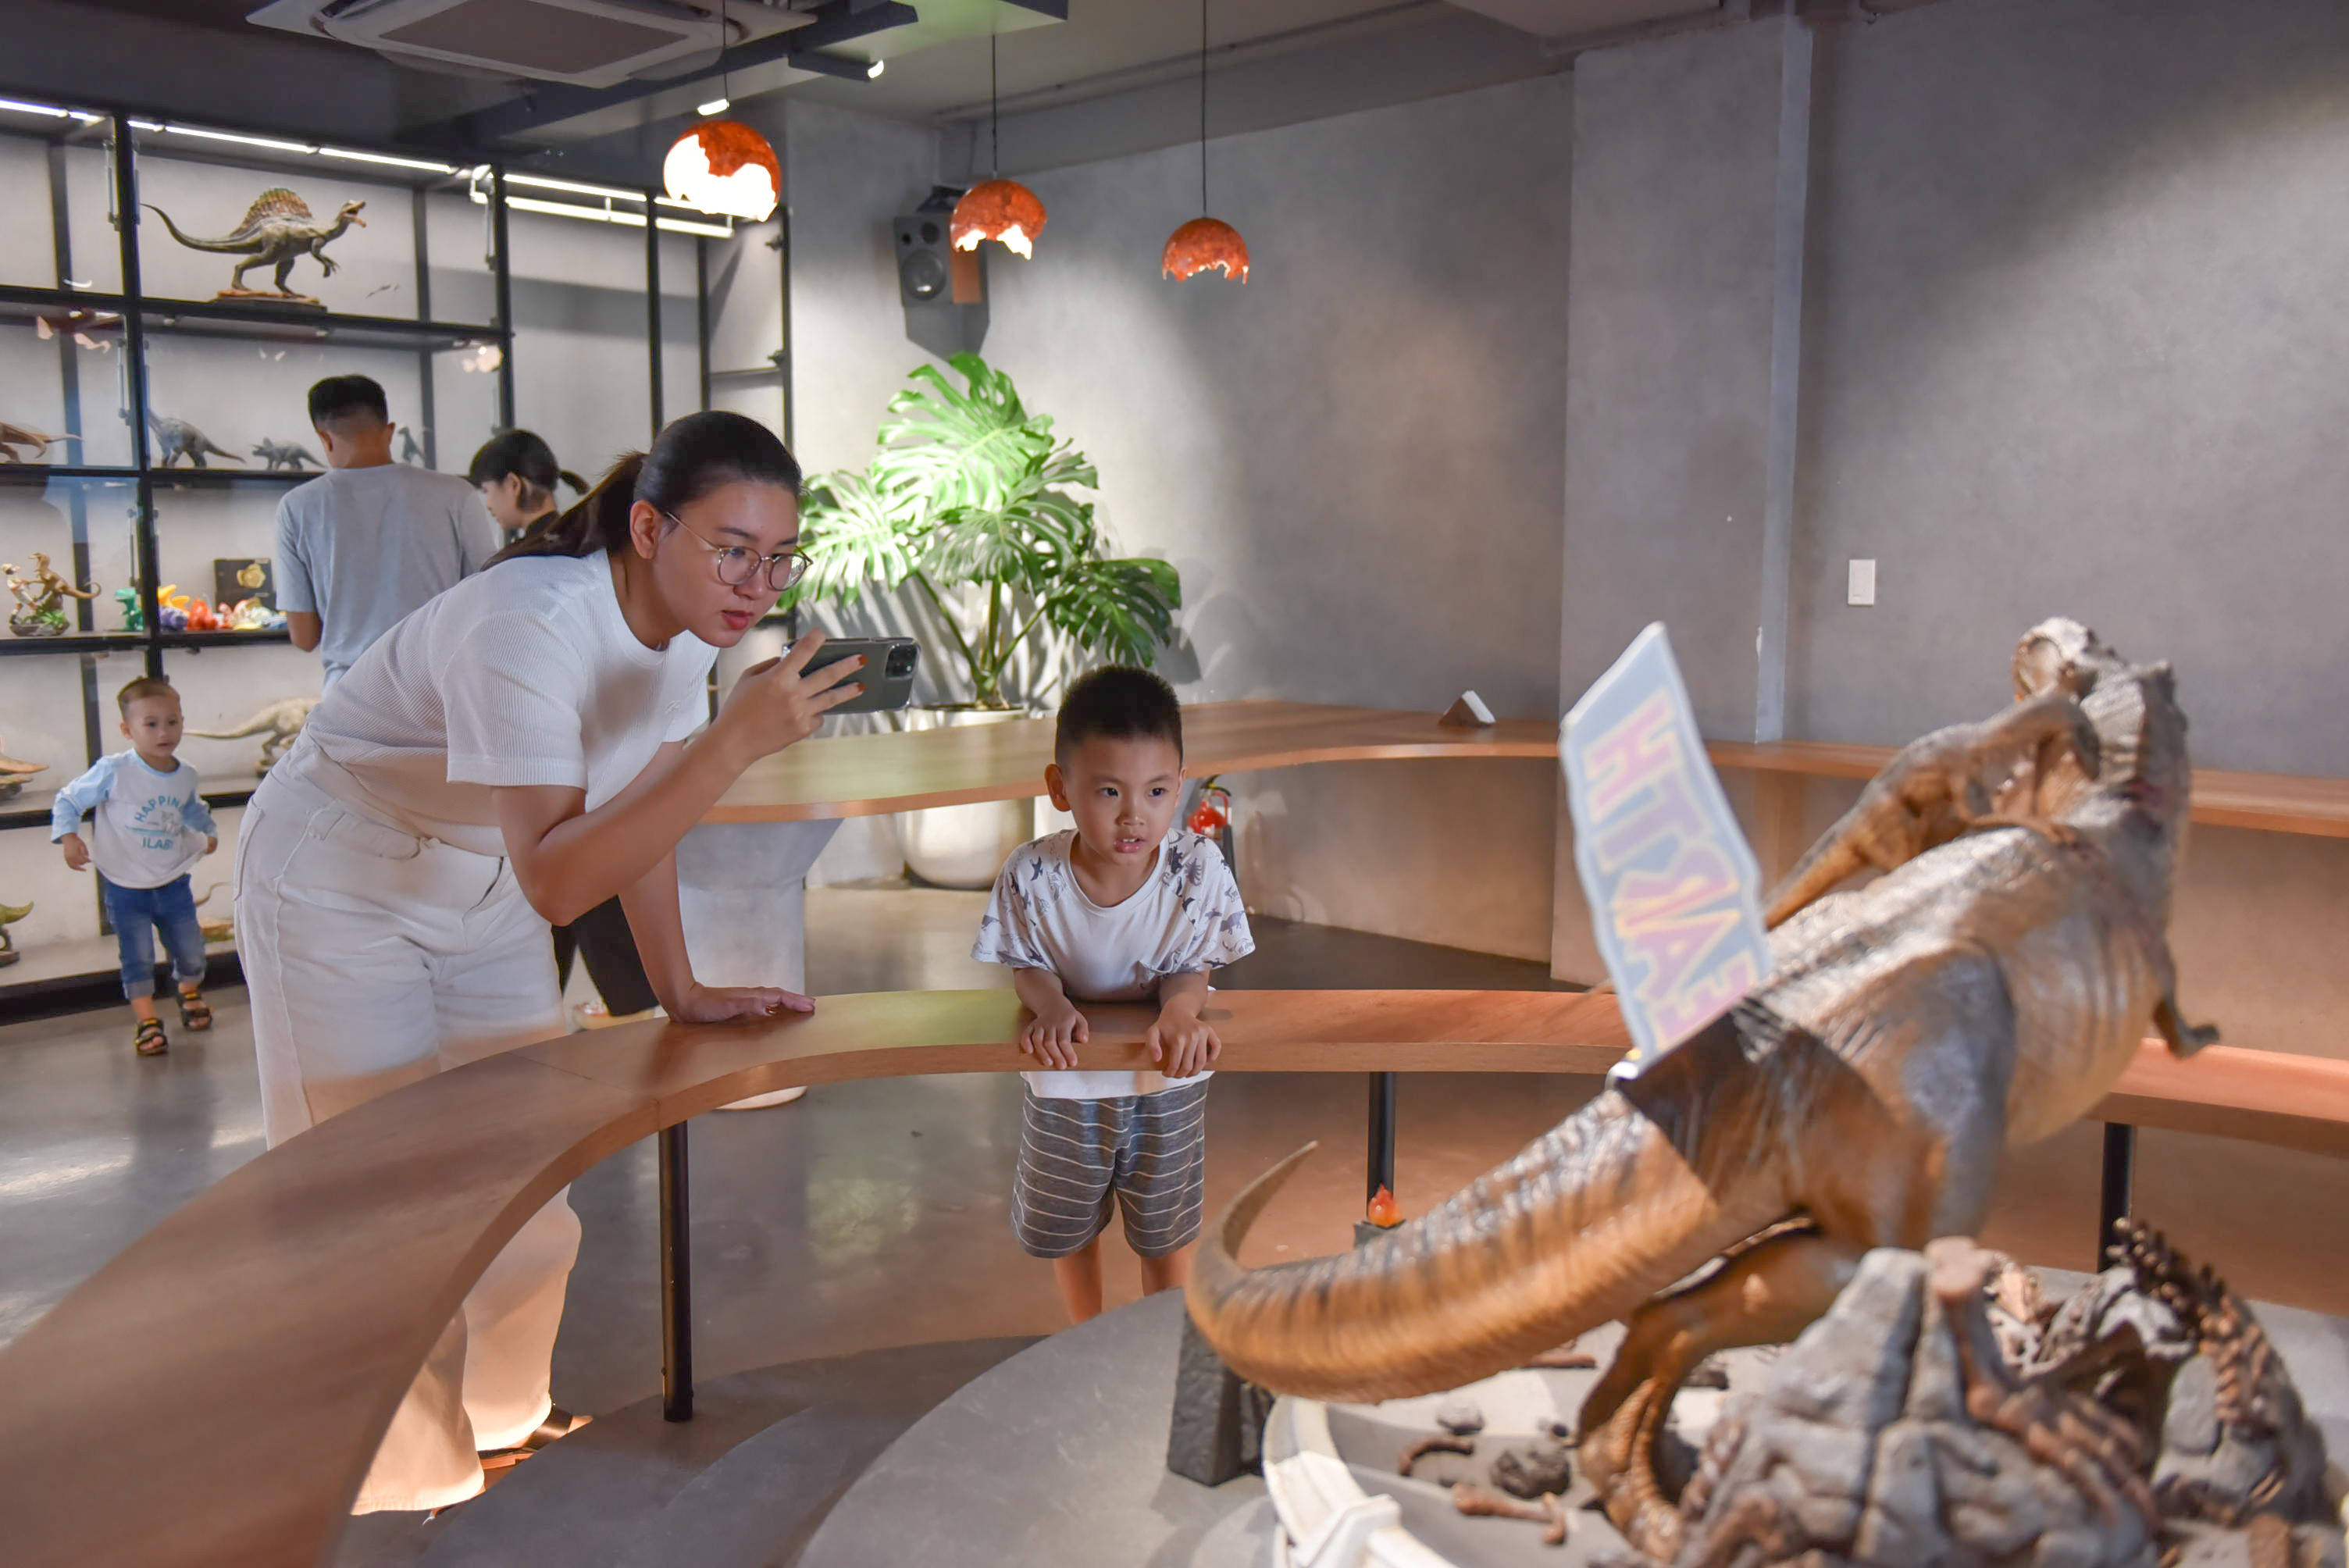 A woman takes a picture of a dinosaur model on display at SAURUS Coffee & Gallery in Go Vap District, Ho Chi Minh City. Photo: Ngoc Phuong / Tuoi Tre News